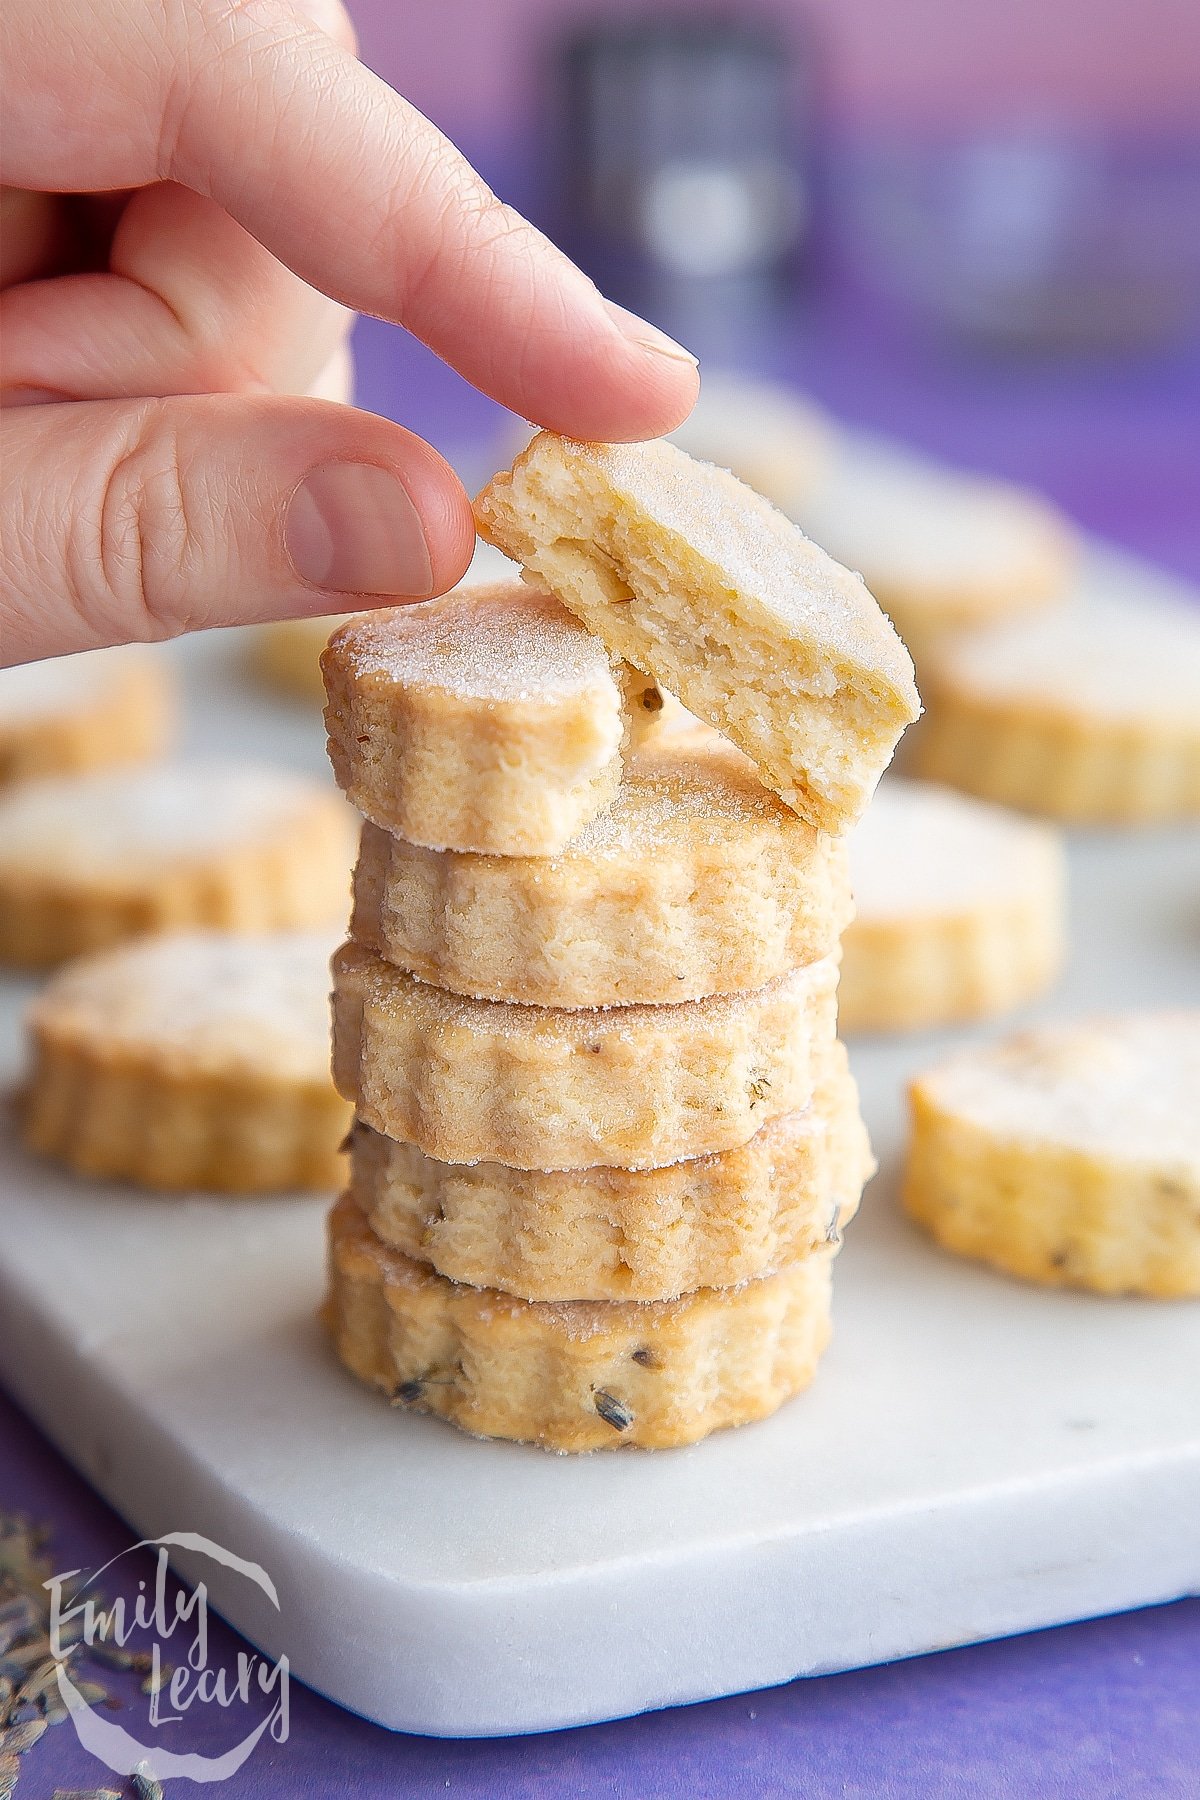 Lavender shortbread cookies in a stack on a marble board. The top one is broken in half and a hand reaches for it.